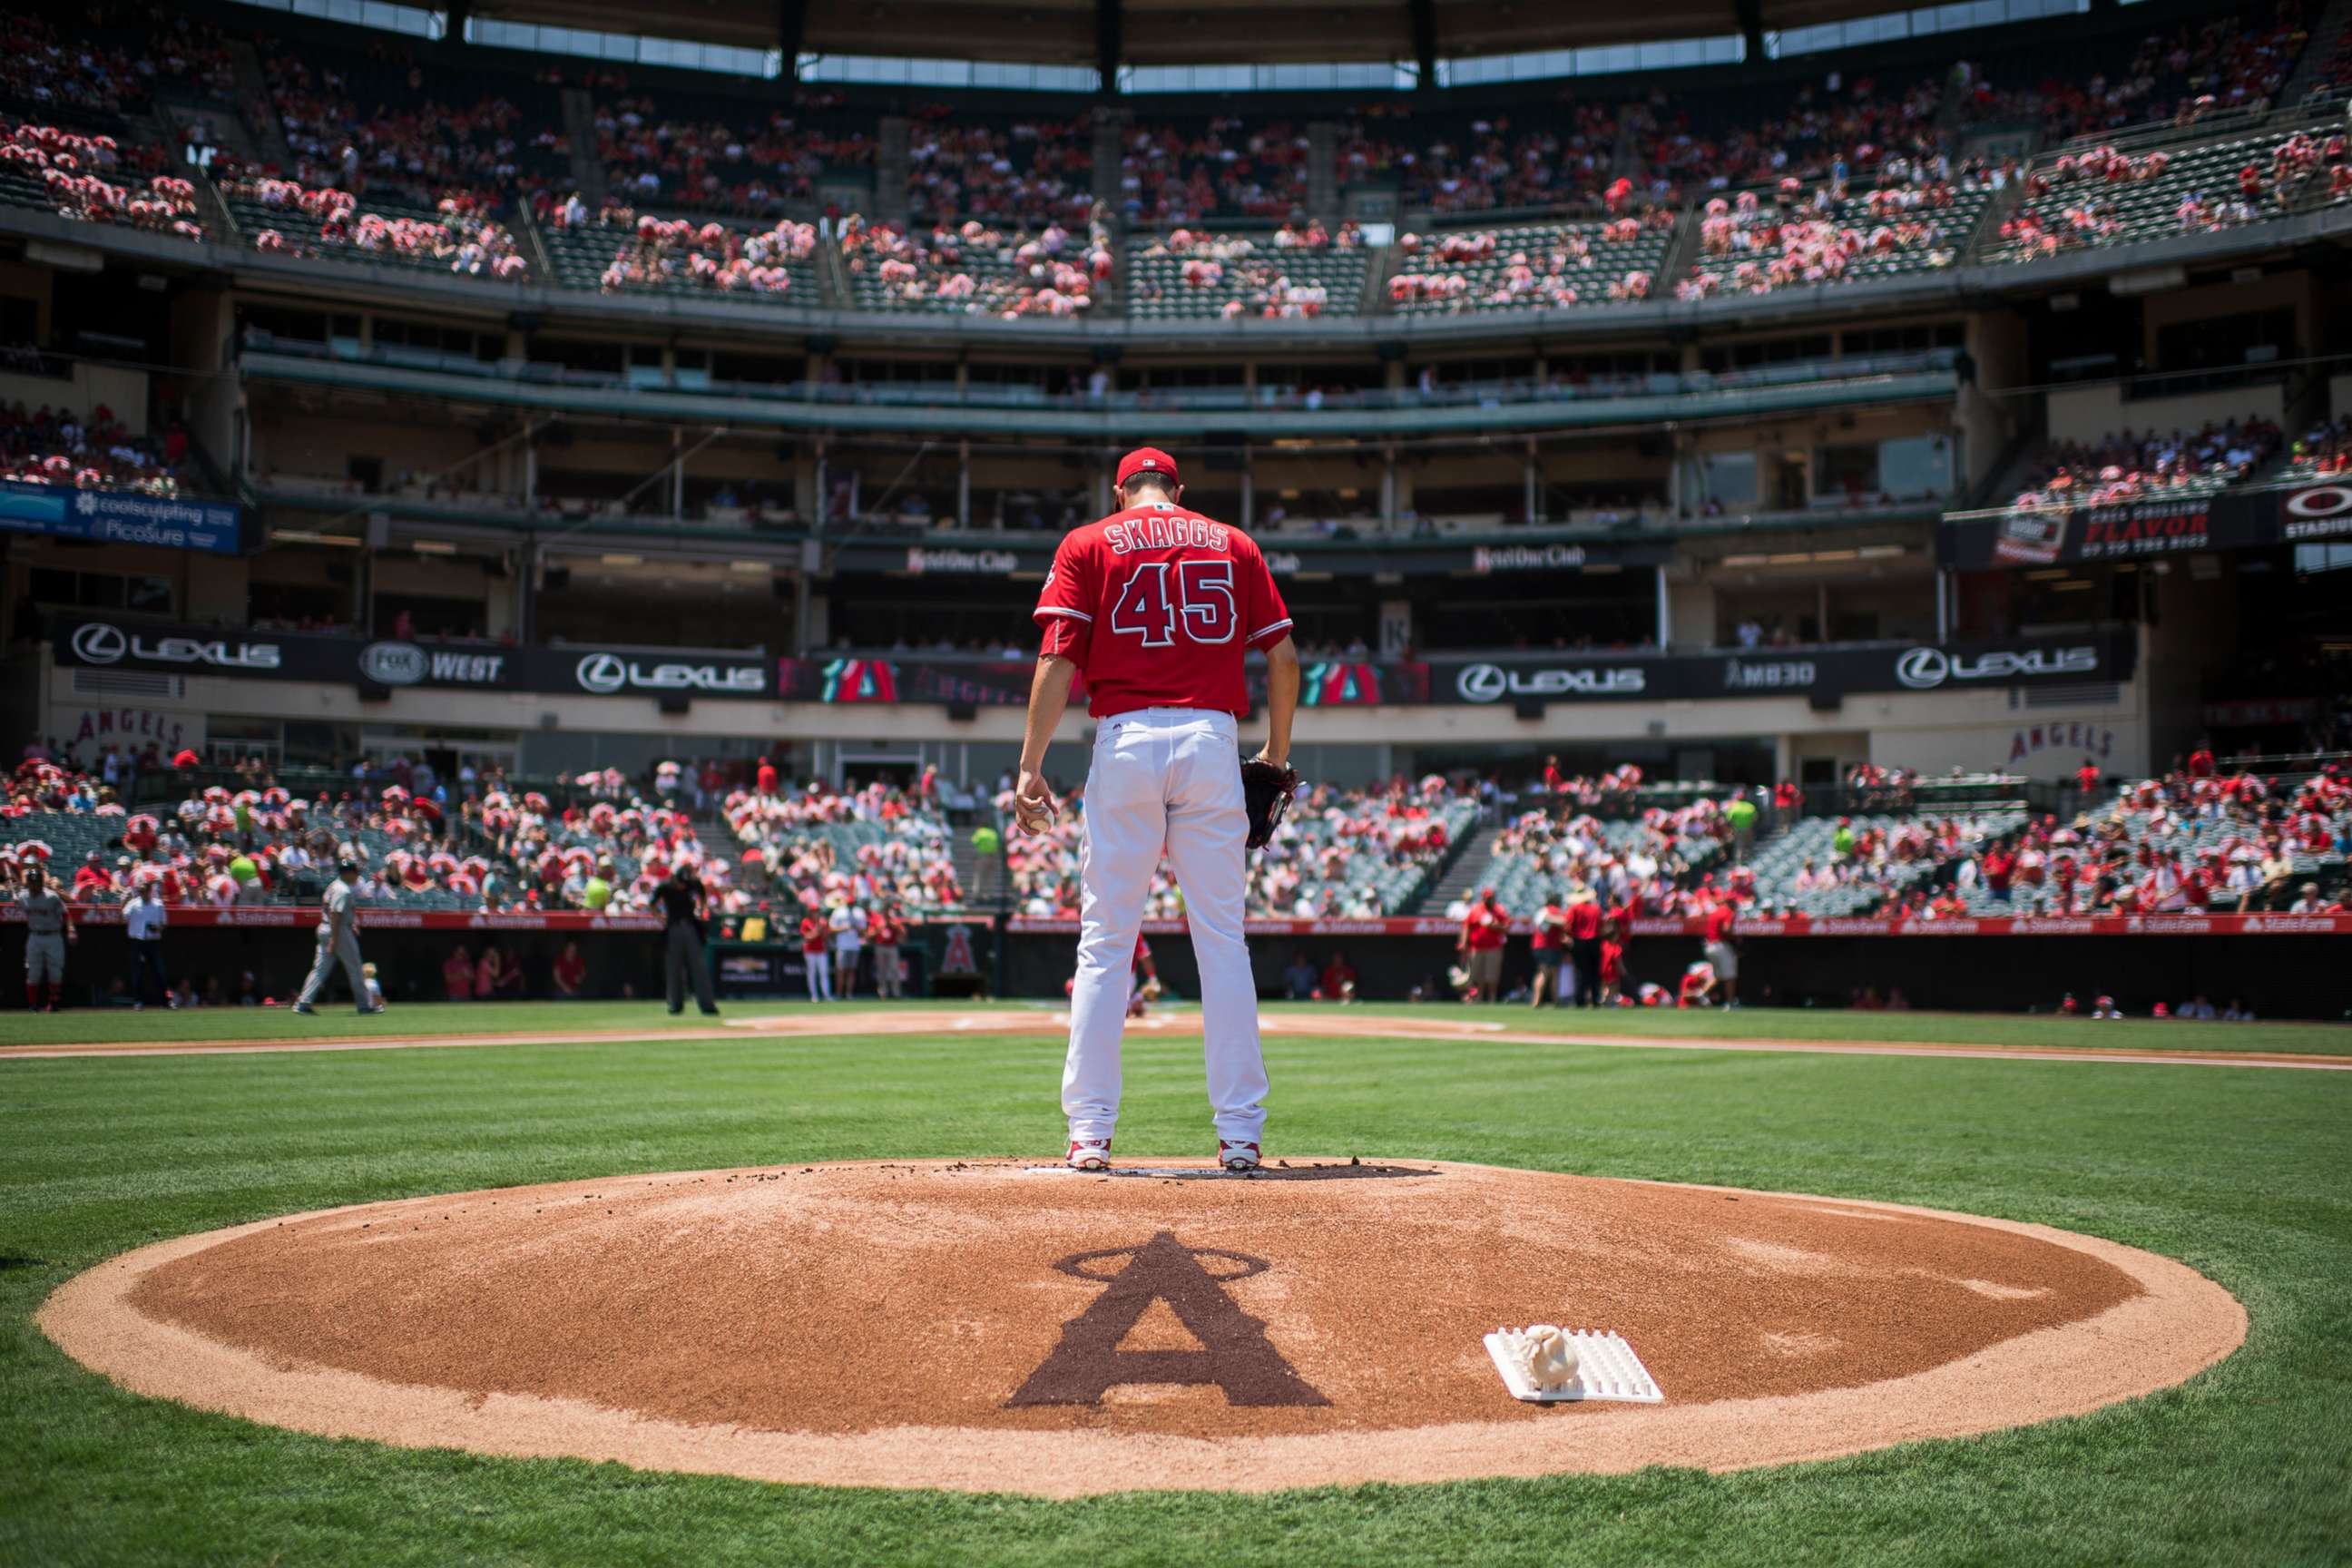 He's here with us' -- How the Angels honored Tyler Skaggs with an